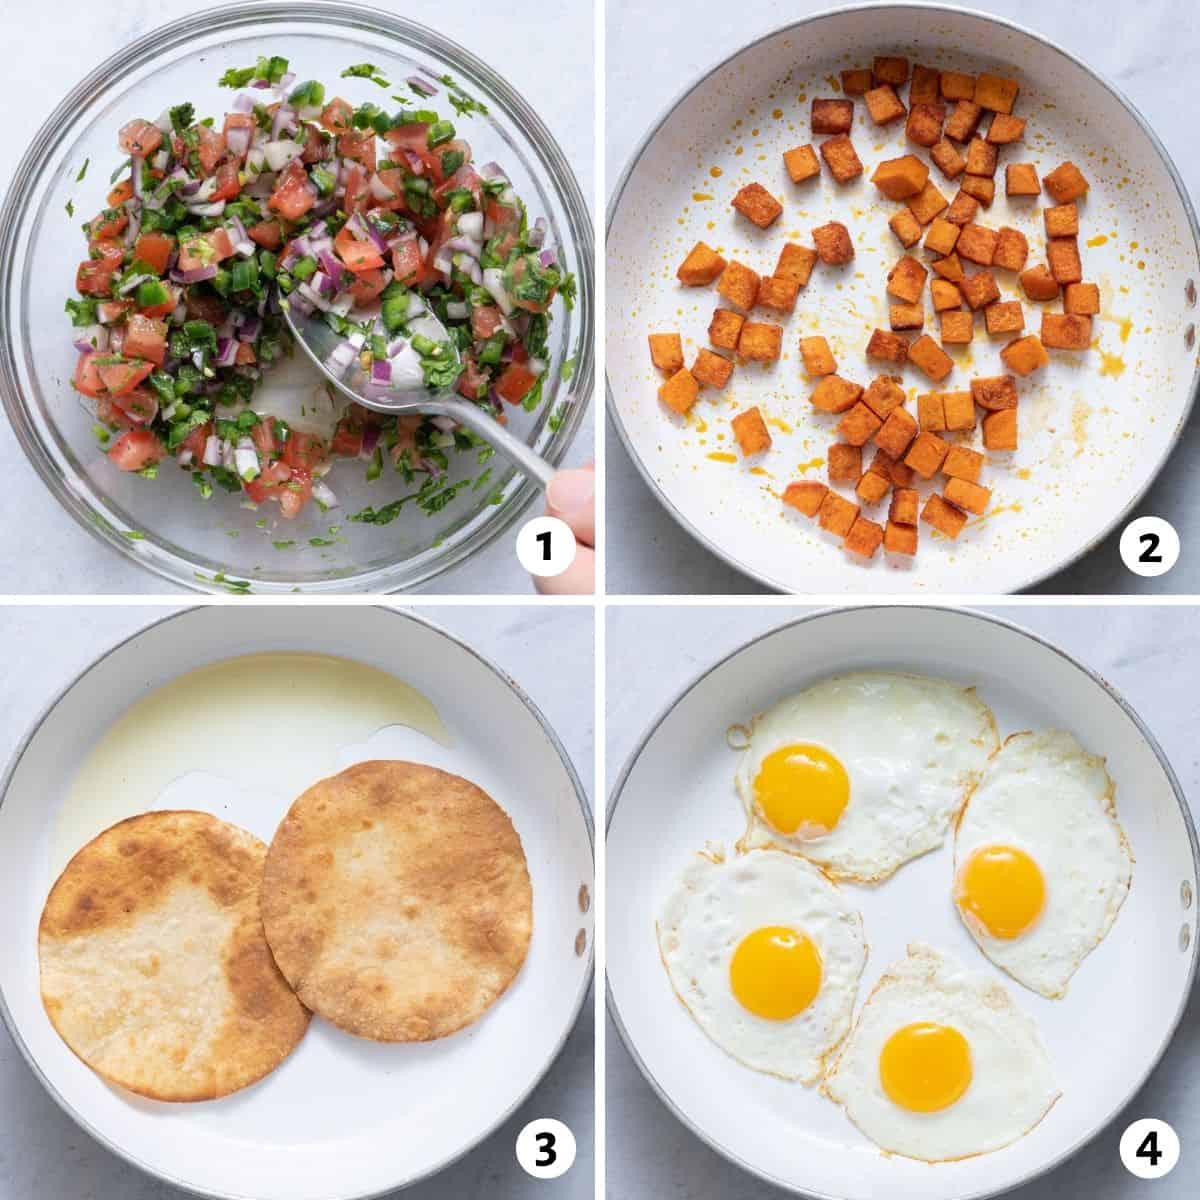 4 image collage showing steps to prepare parts of recipe including salsa, pan-frying potatoes, pitas, and eggs.